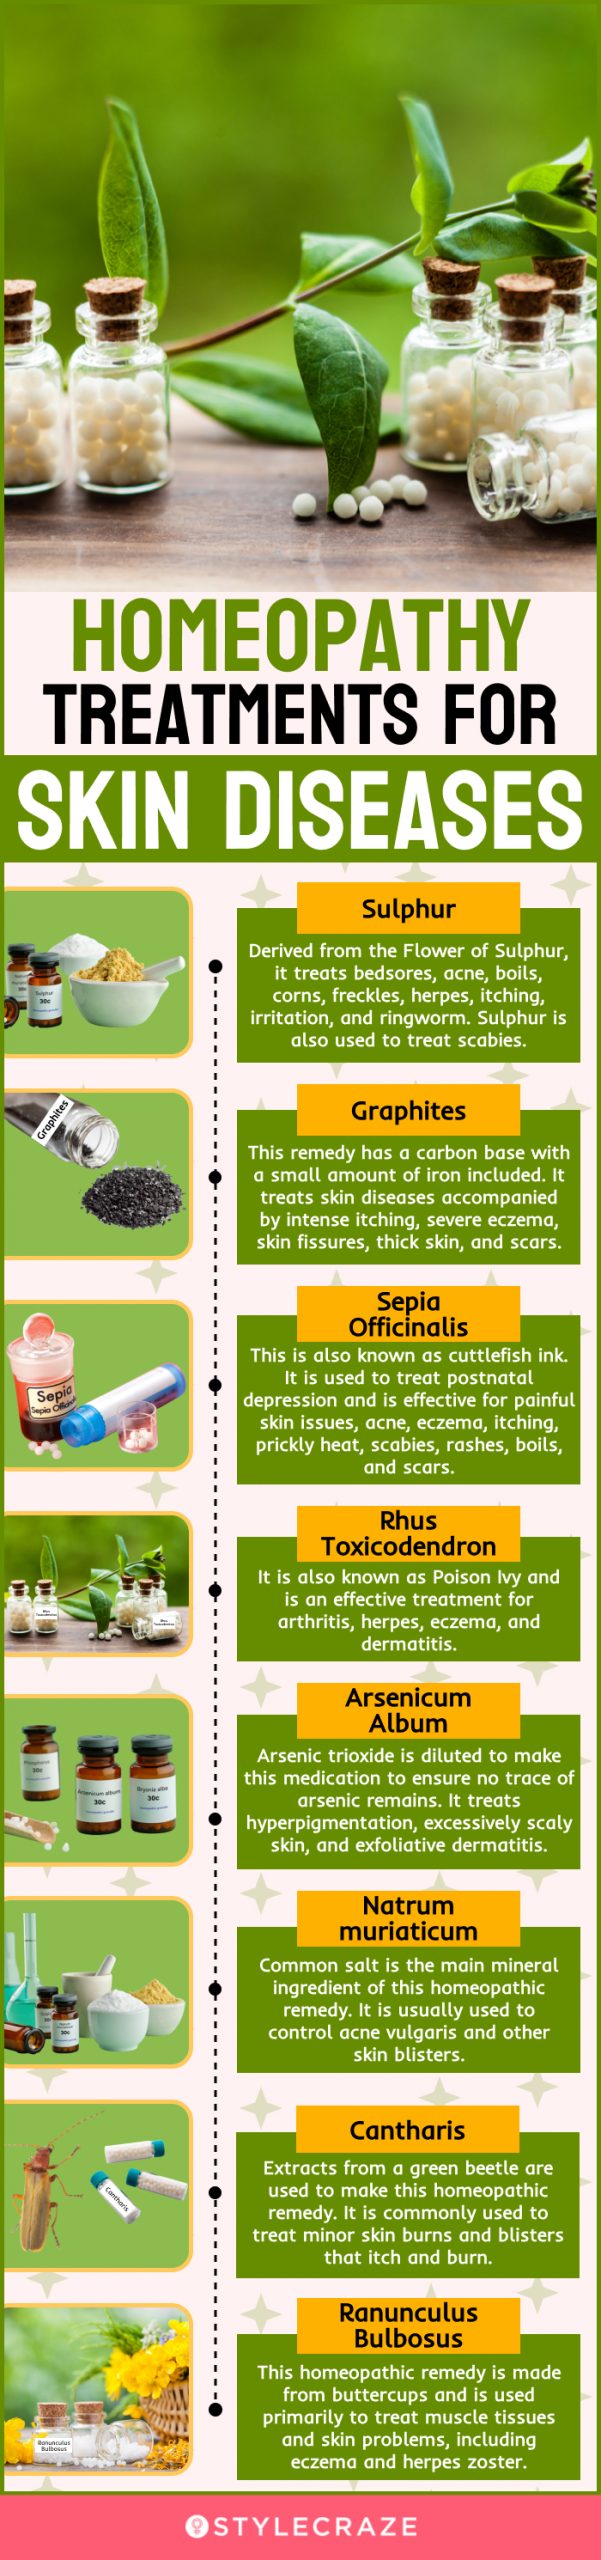 homeopathy treatments for skin diseases (infographic)